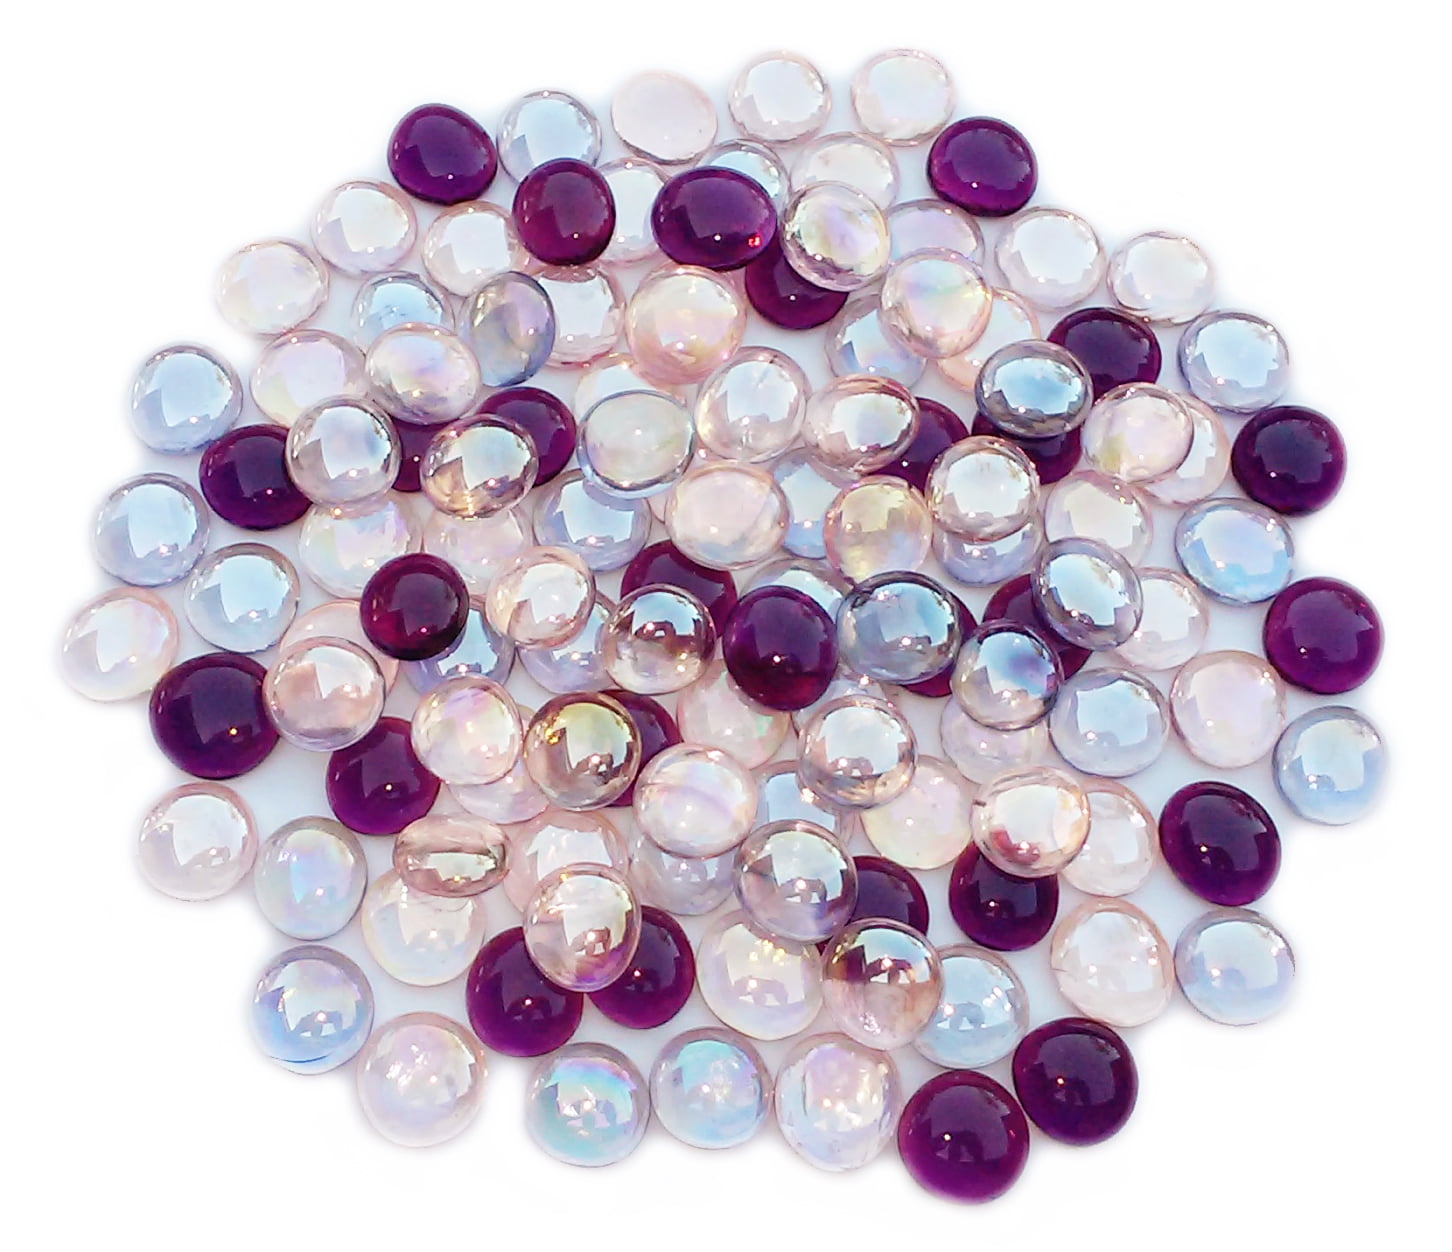 100 Pcs Decorative Glass Gems Mosaics Mixed Color Sea Blue Clear and Royal Blue for Vase Fillers,Aquarium,Crafts,Fountain Items 